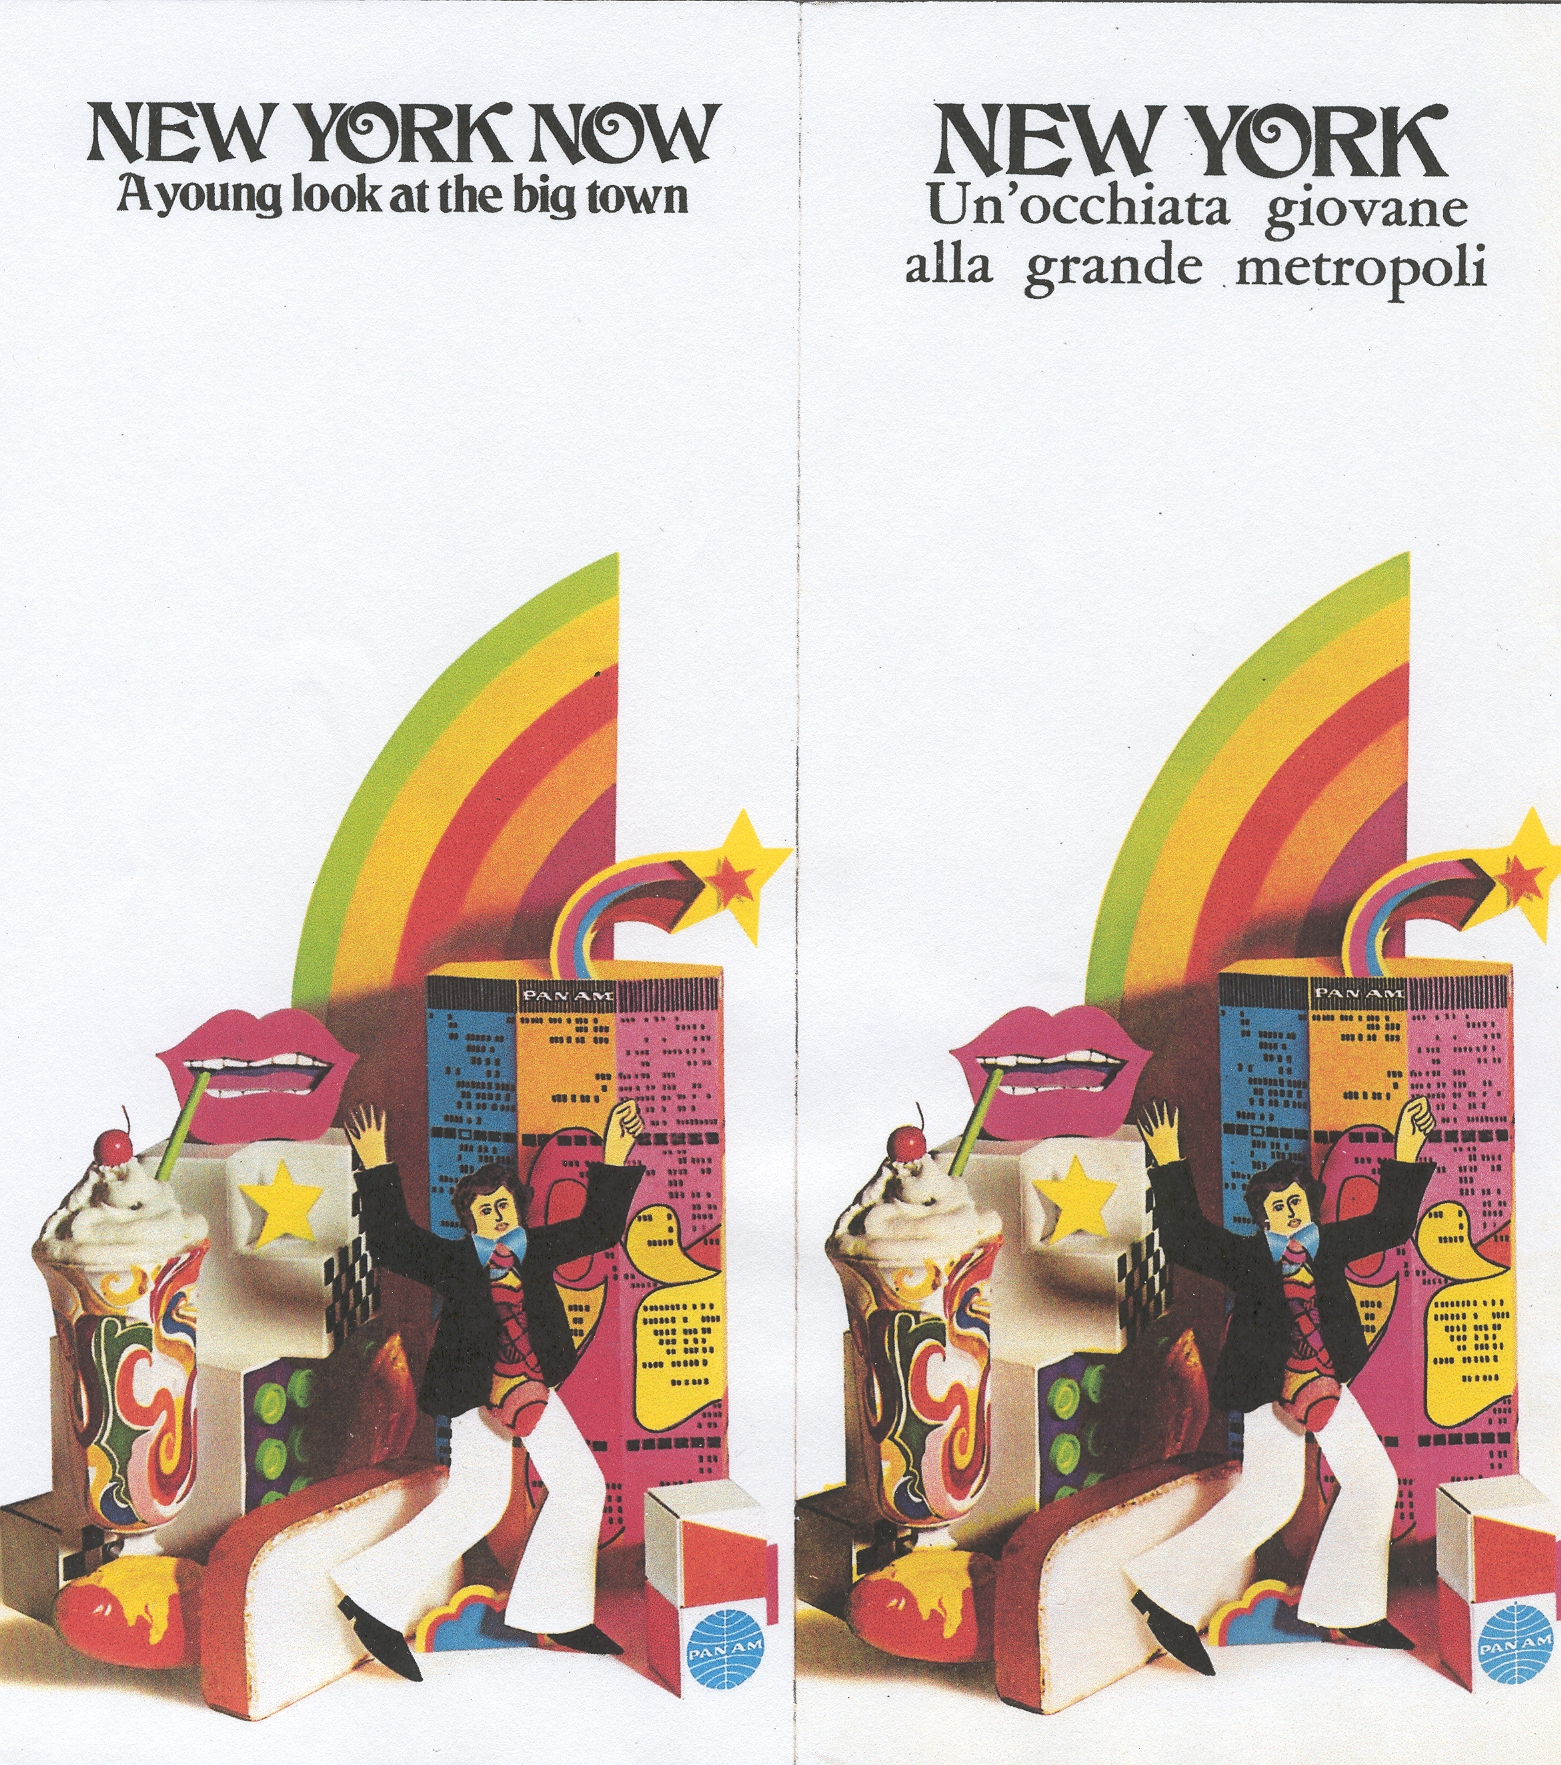 Sample brochure covers promoting New York early 1970s